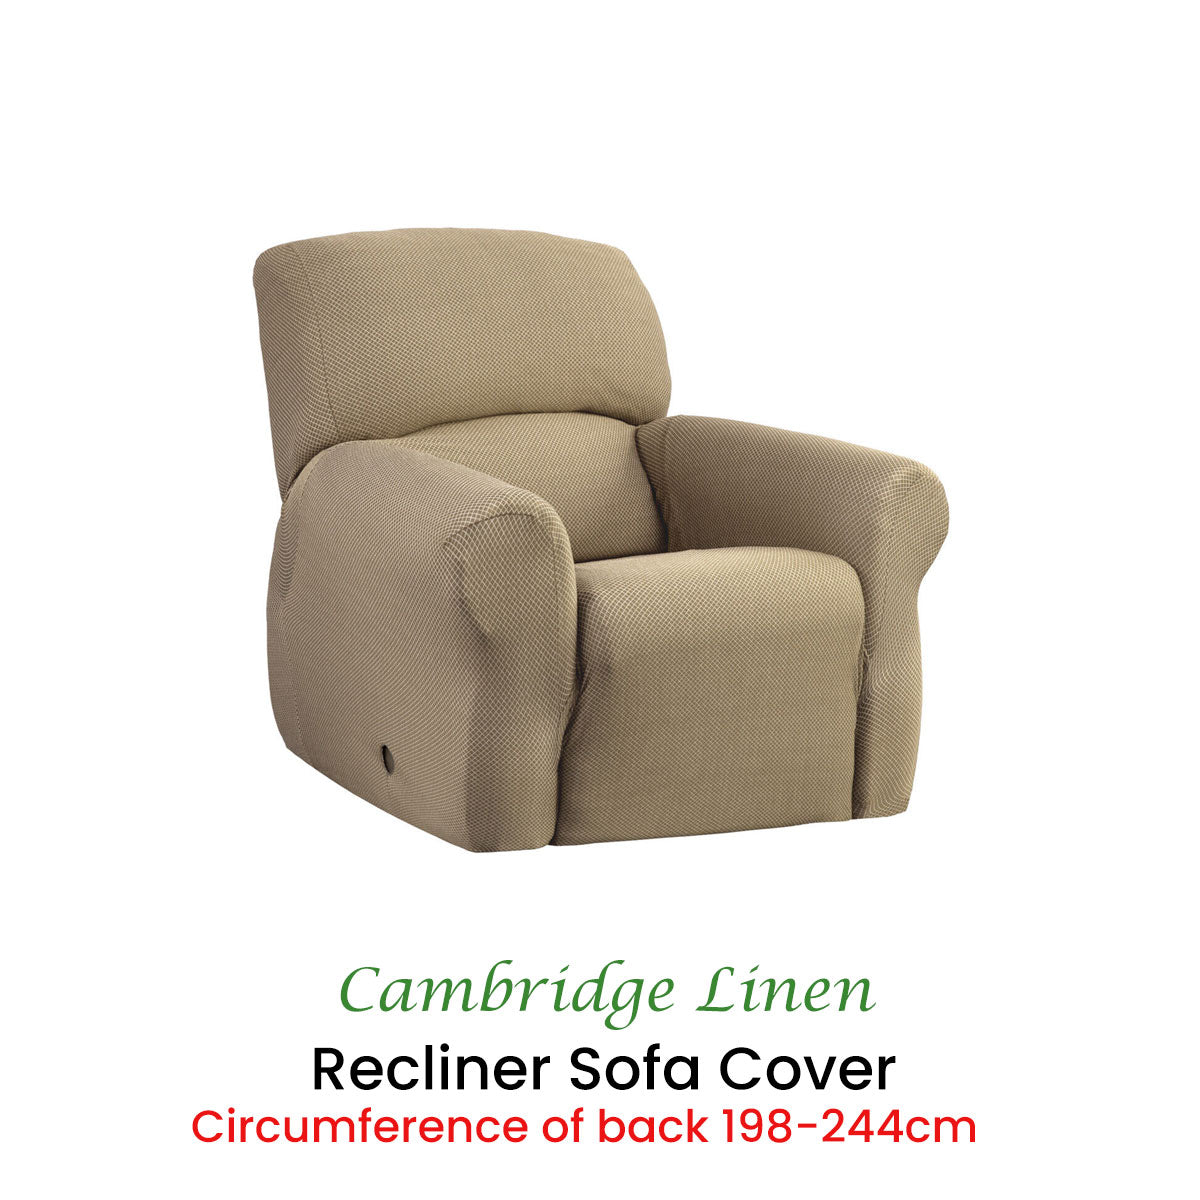 Cambridge Extra-stretch Couch Cover Linen One Seater Recliner Linen